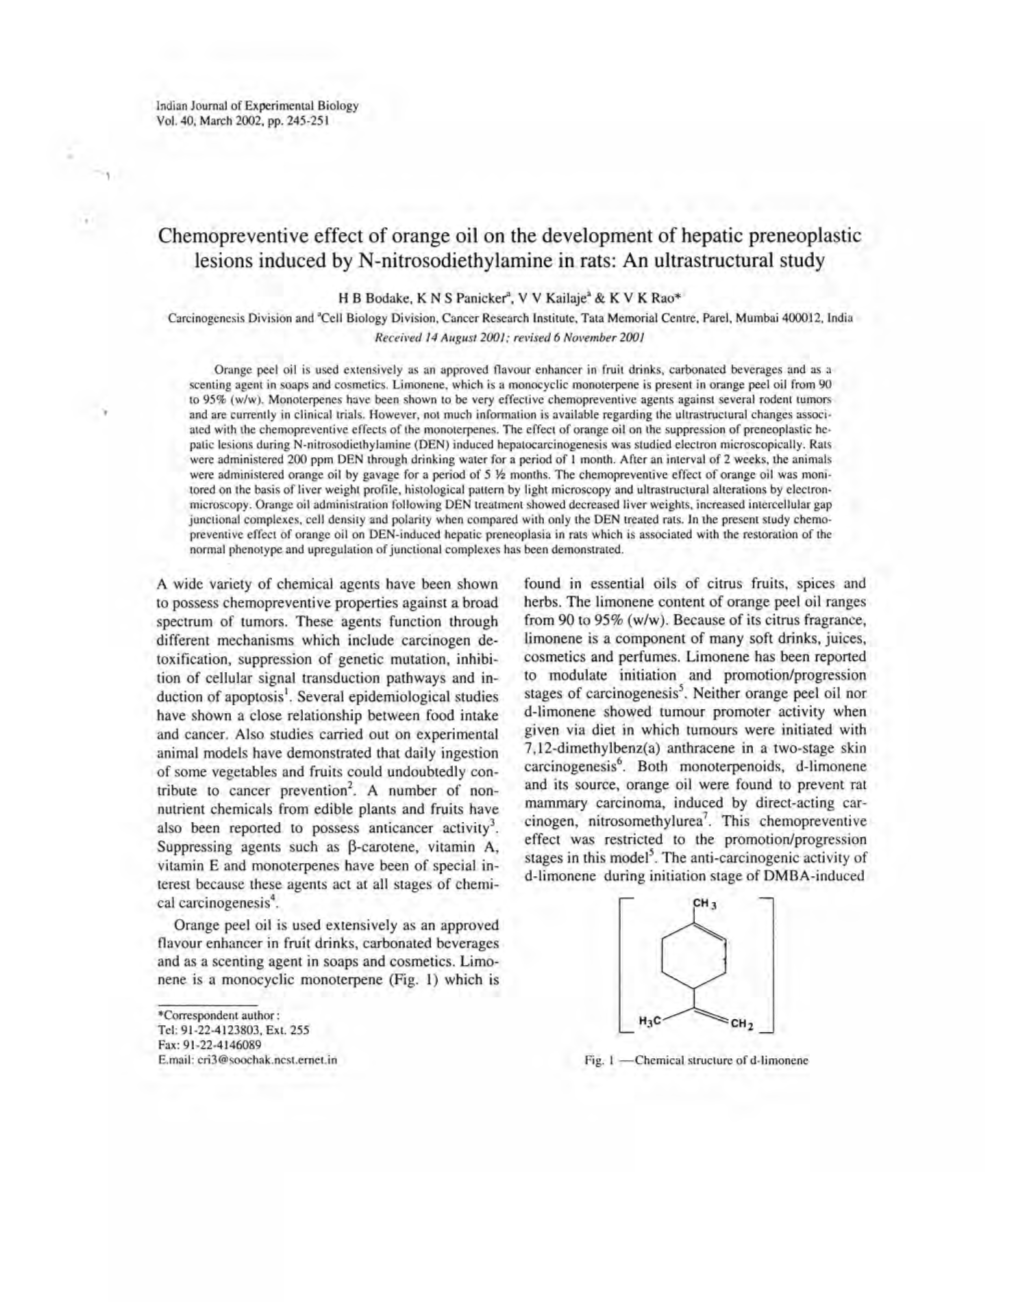 Chemopreventi Ve Effect of Orange Oil on the Development of Hepatic Preneoplastic Lesions Induced by N-Nitrosodiethylamine in Rats: an Ultrastructural Study